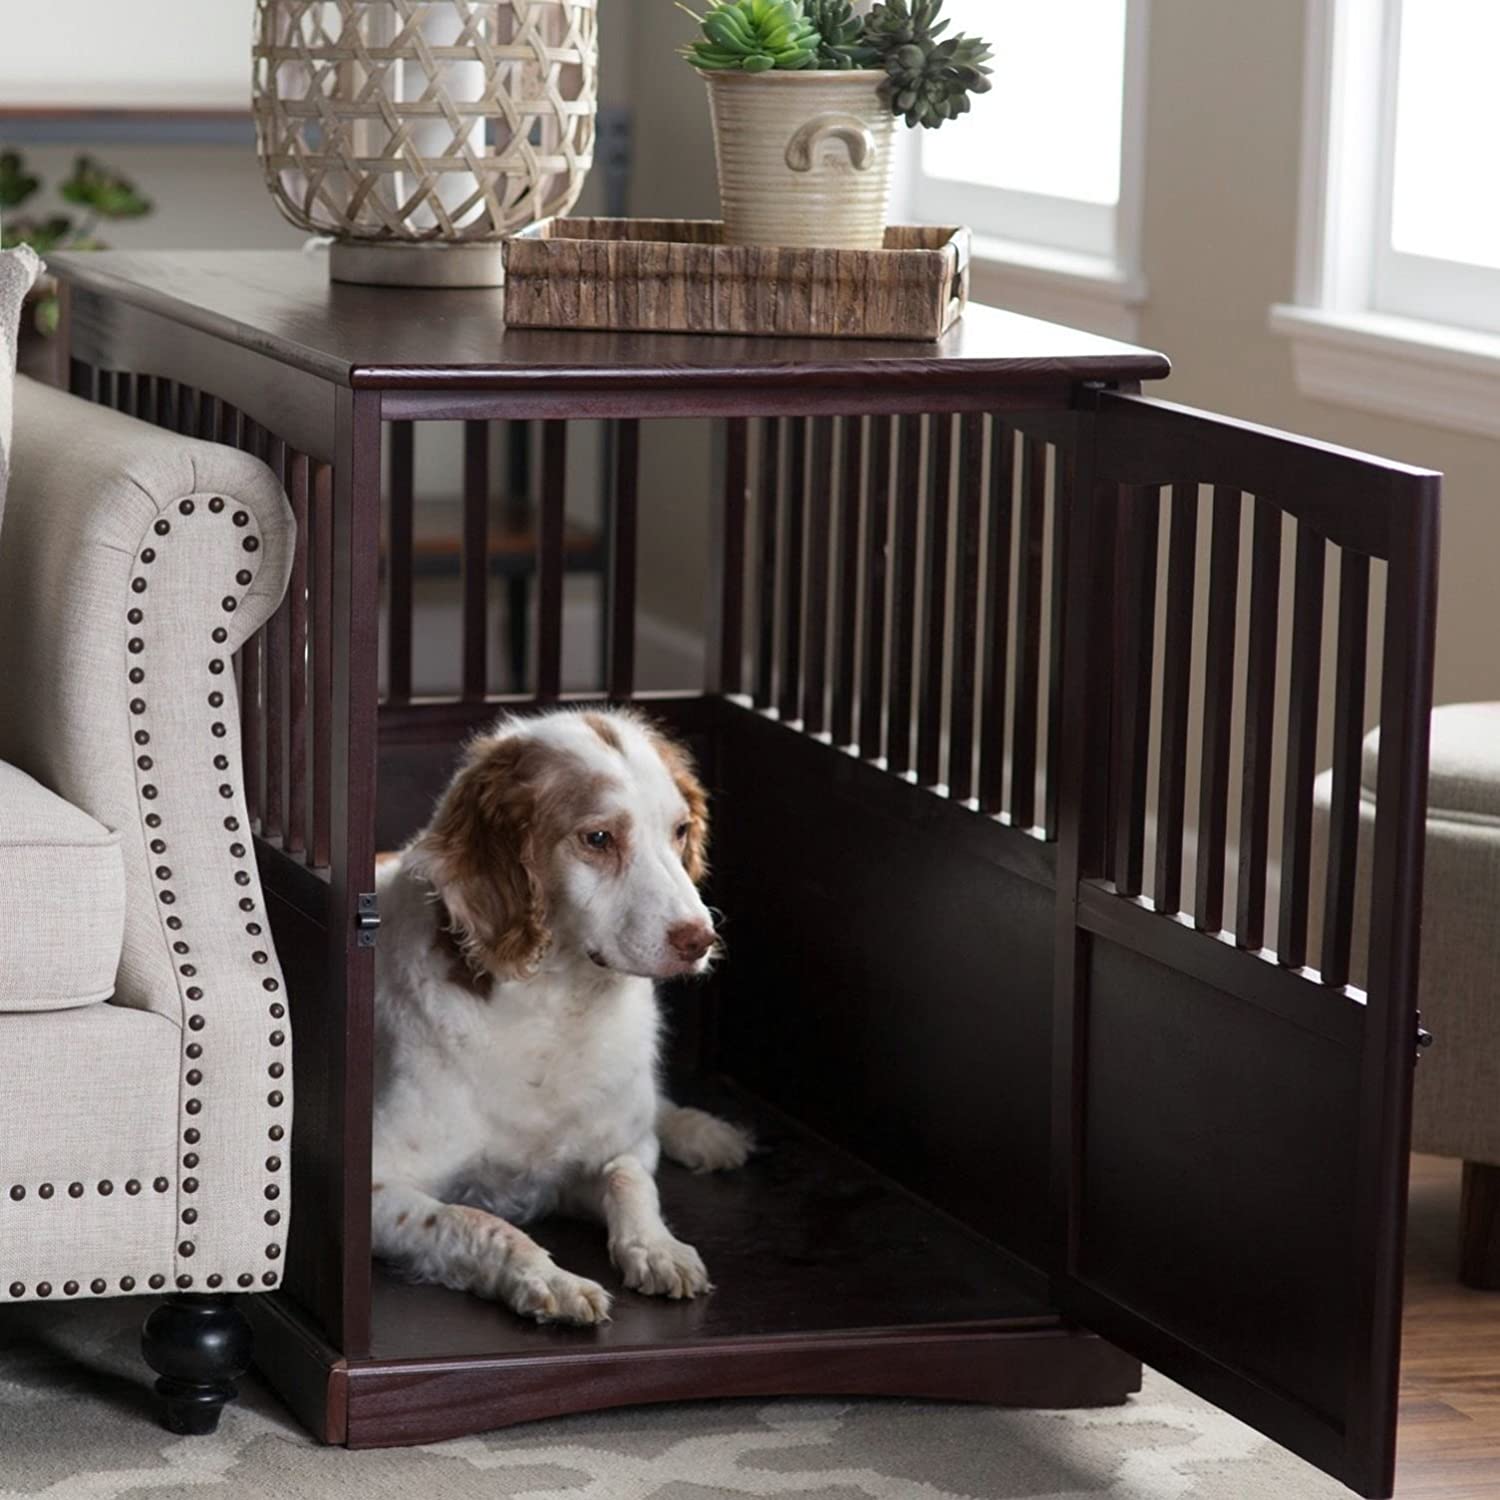 Newport Dog Crate Kennel Cage Bed Night Stand End Table Wood Furniture Cave House Room Large Size:Dark Brown